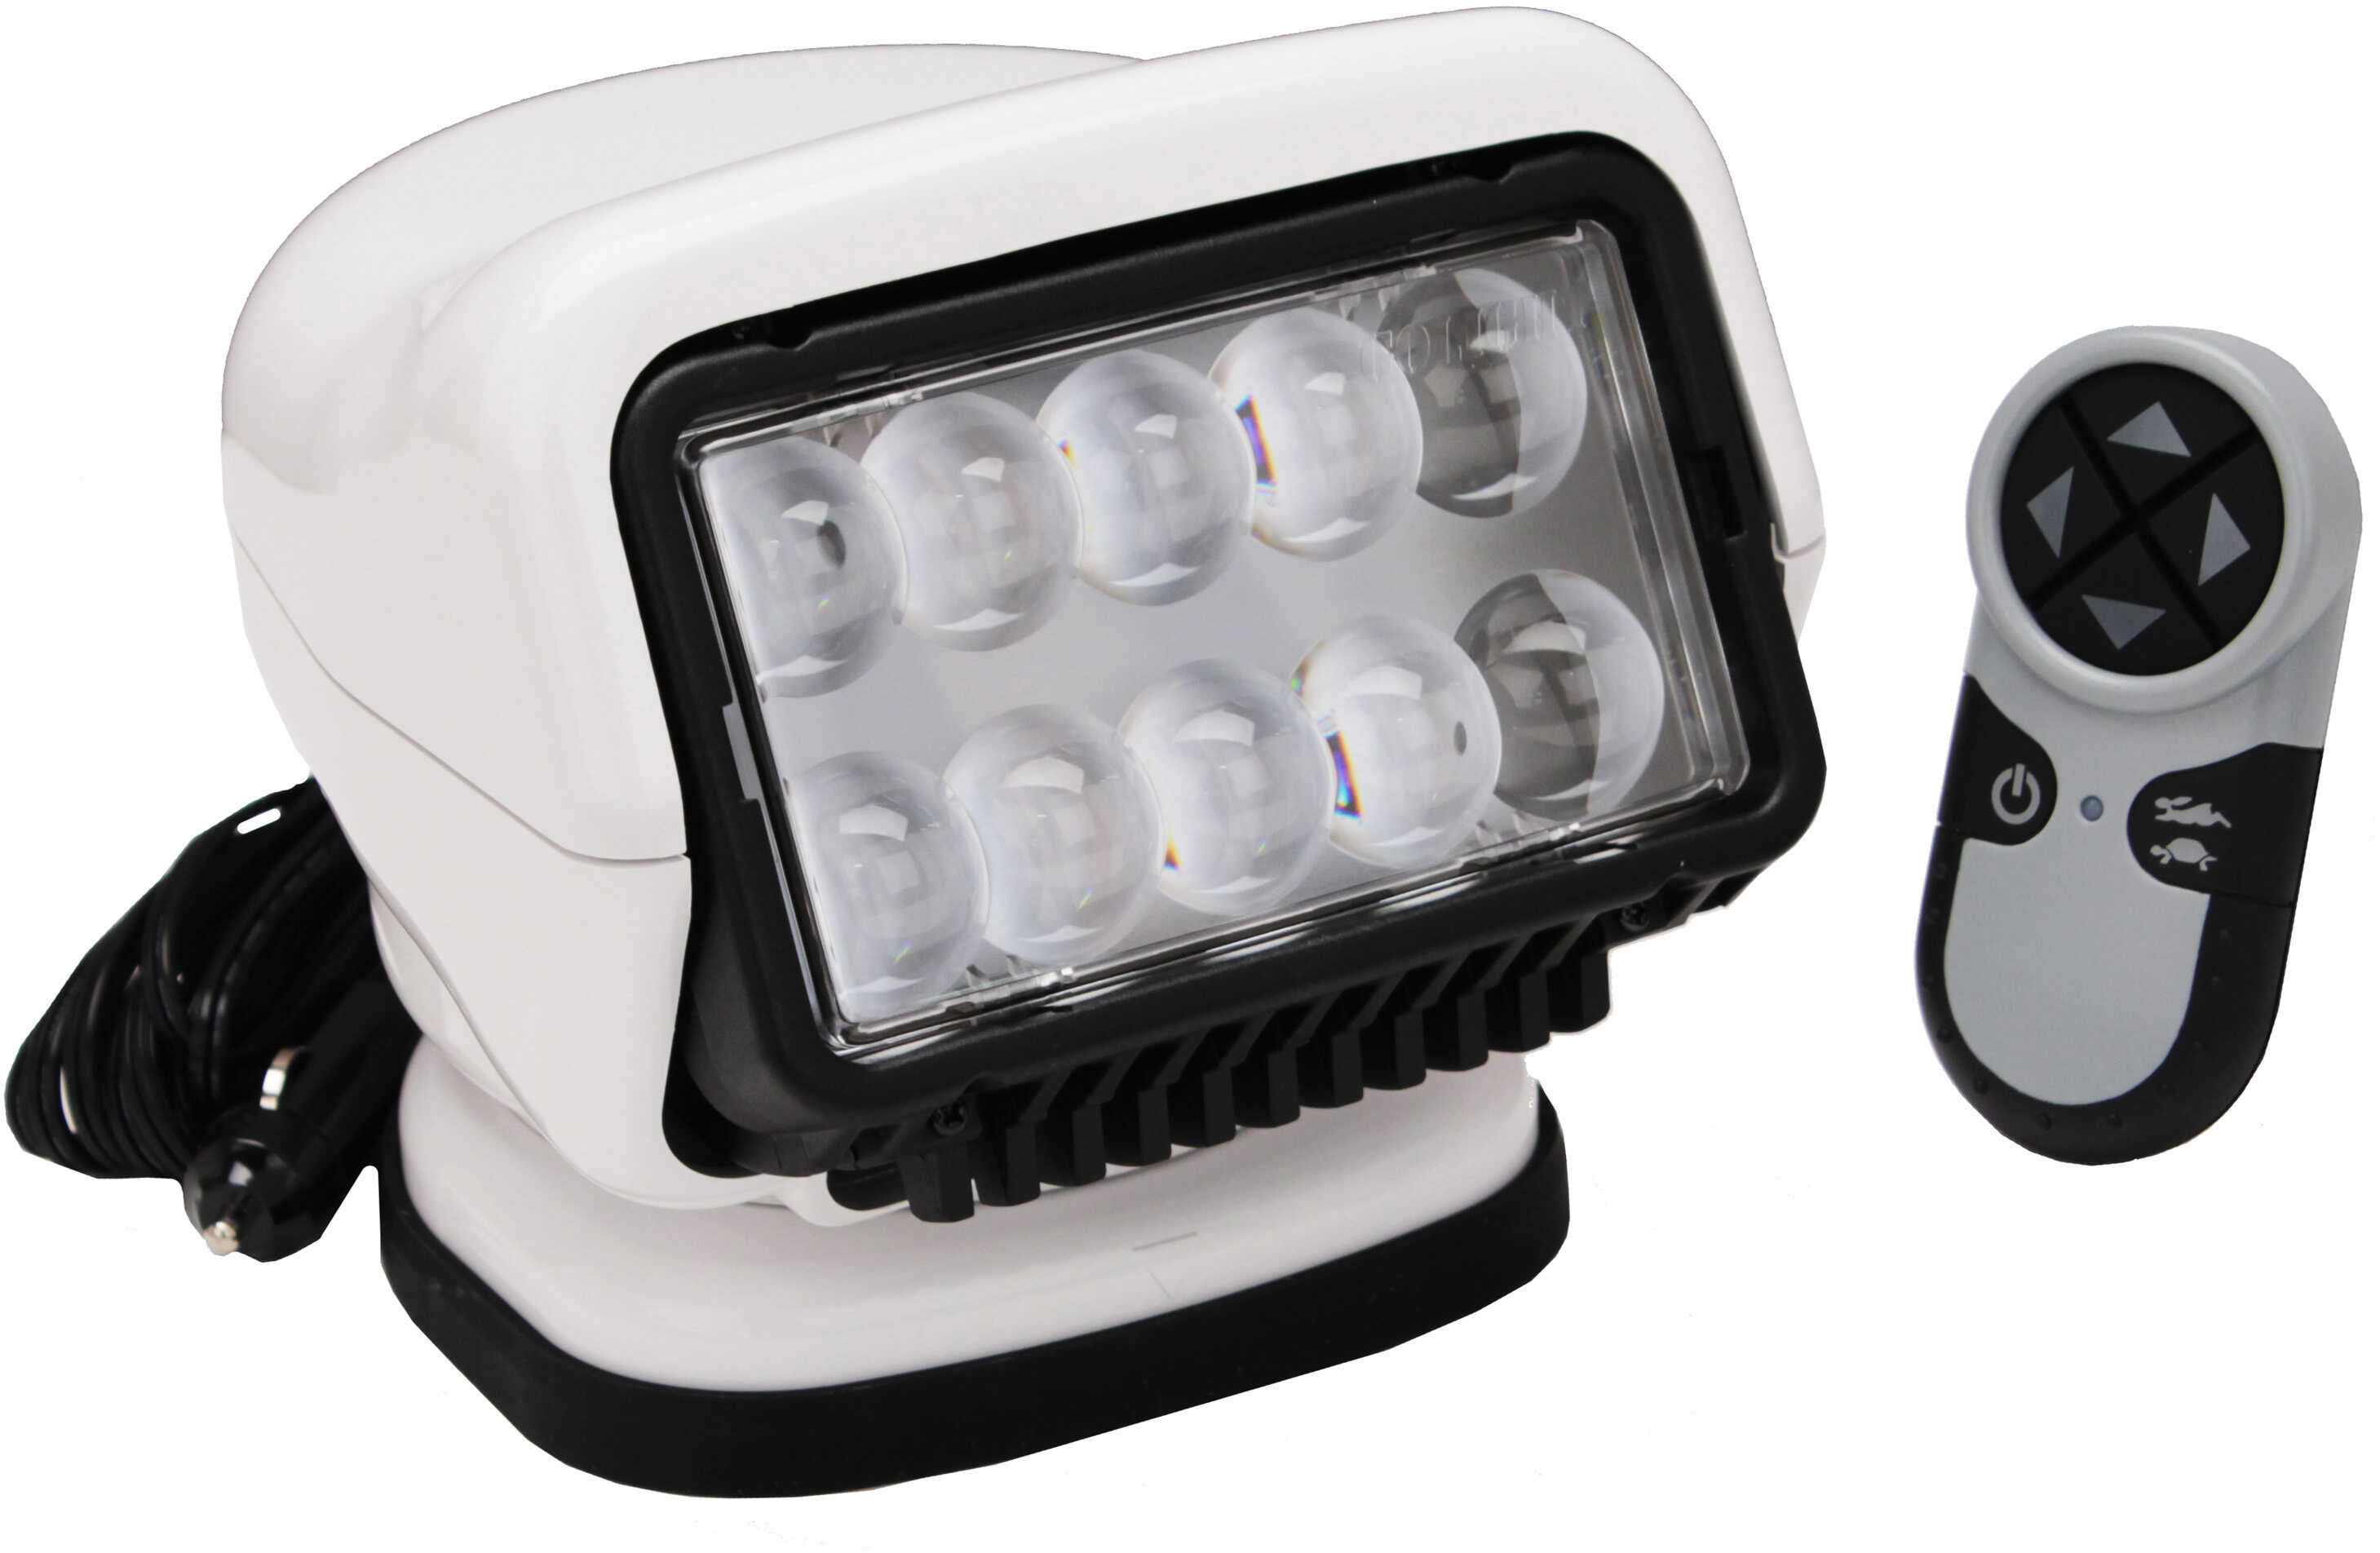 Golight LED Stryker Searchlight w/Wireless Handheld Remote - Magnetic Base - White